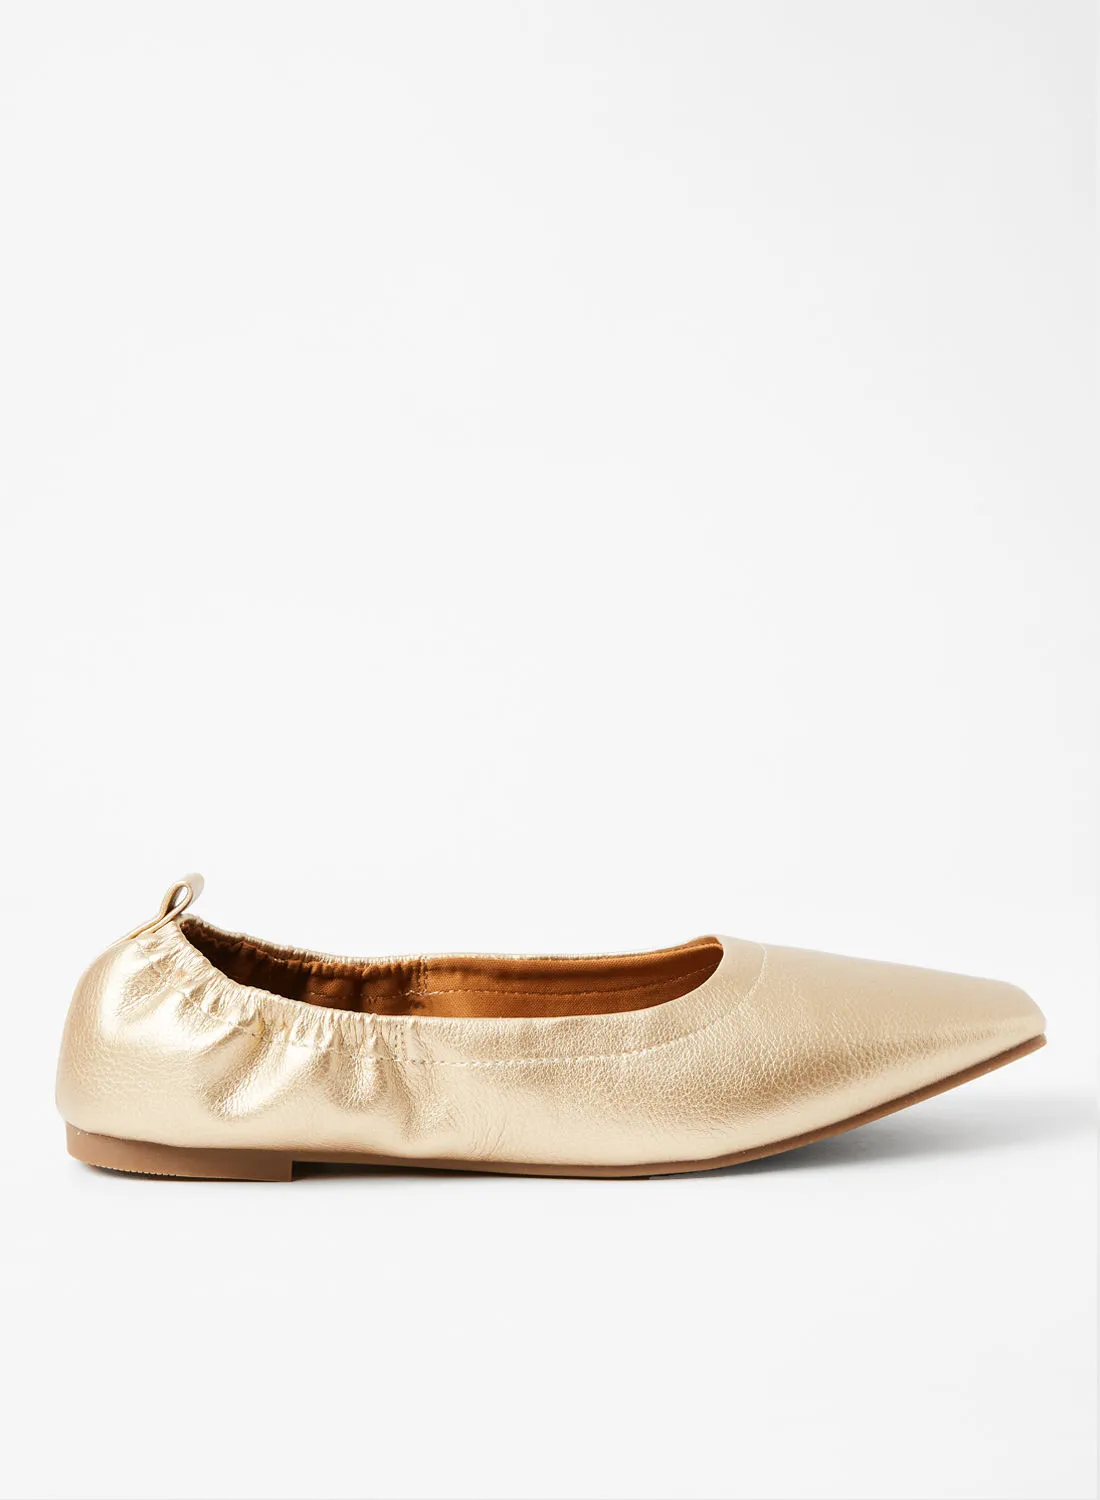 CALL IT SPRING Chenelle Vegan Leather Ballerinas Gold